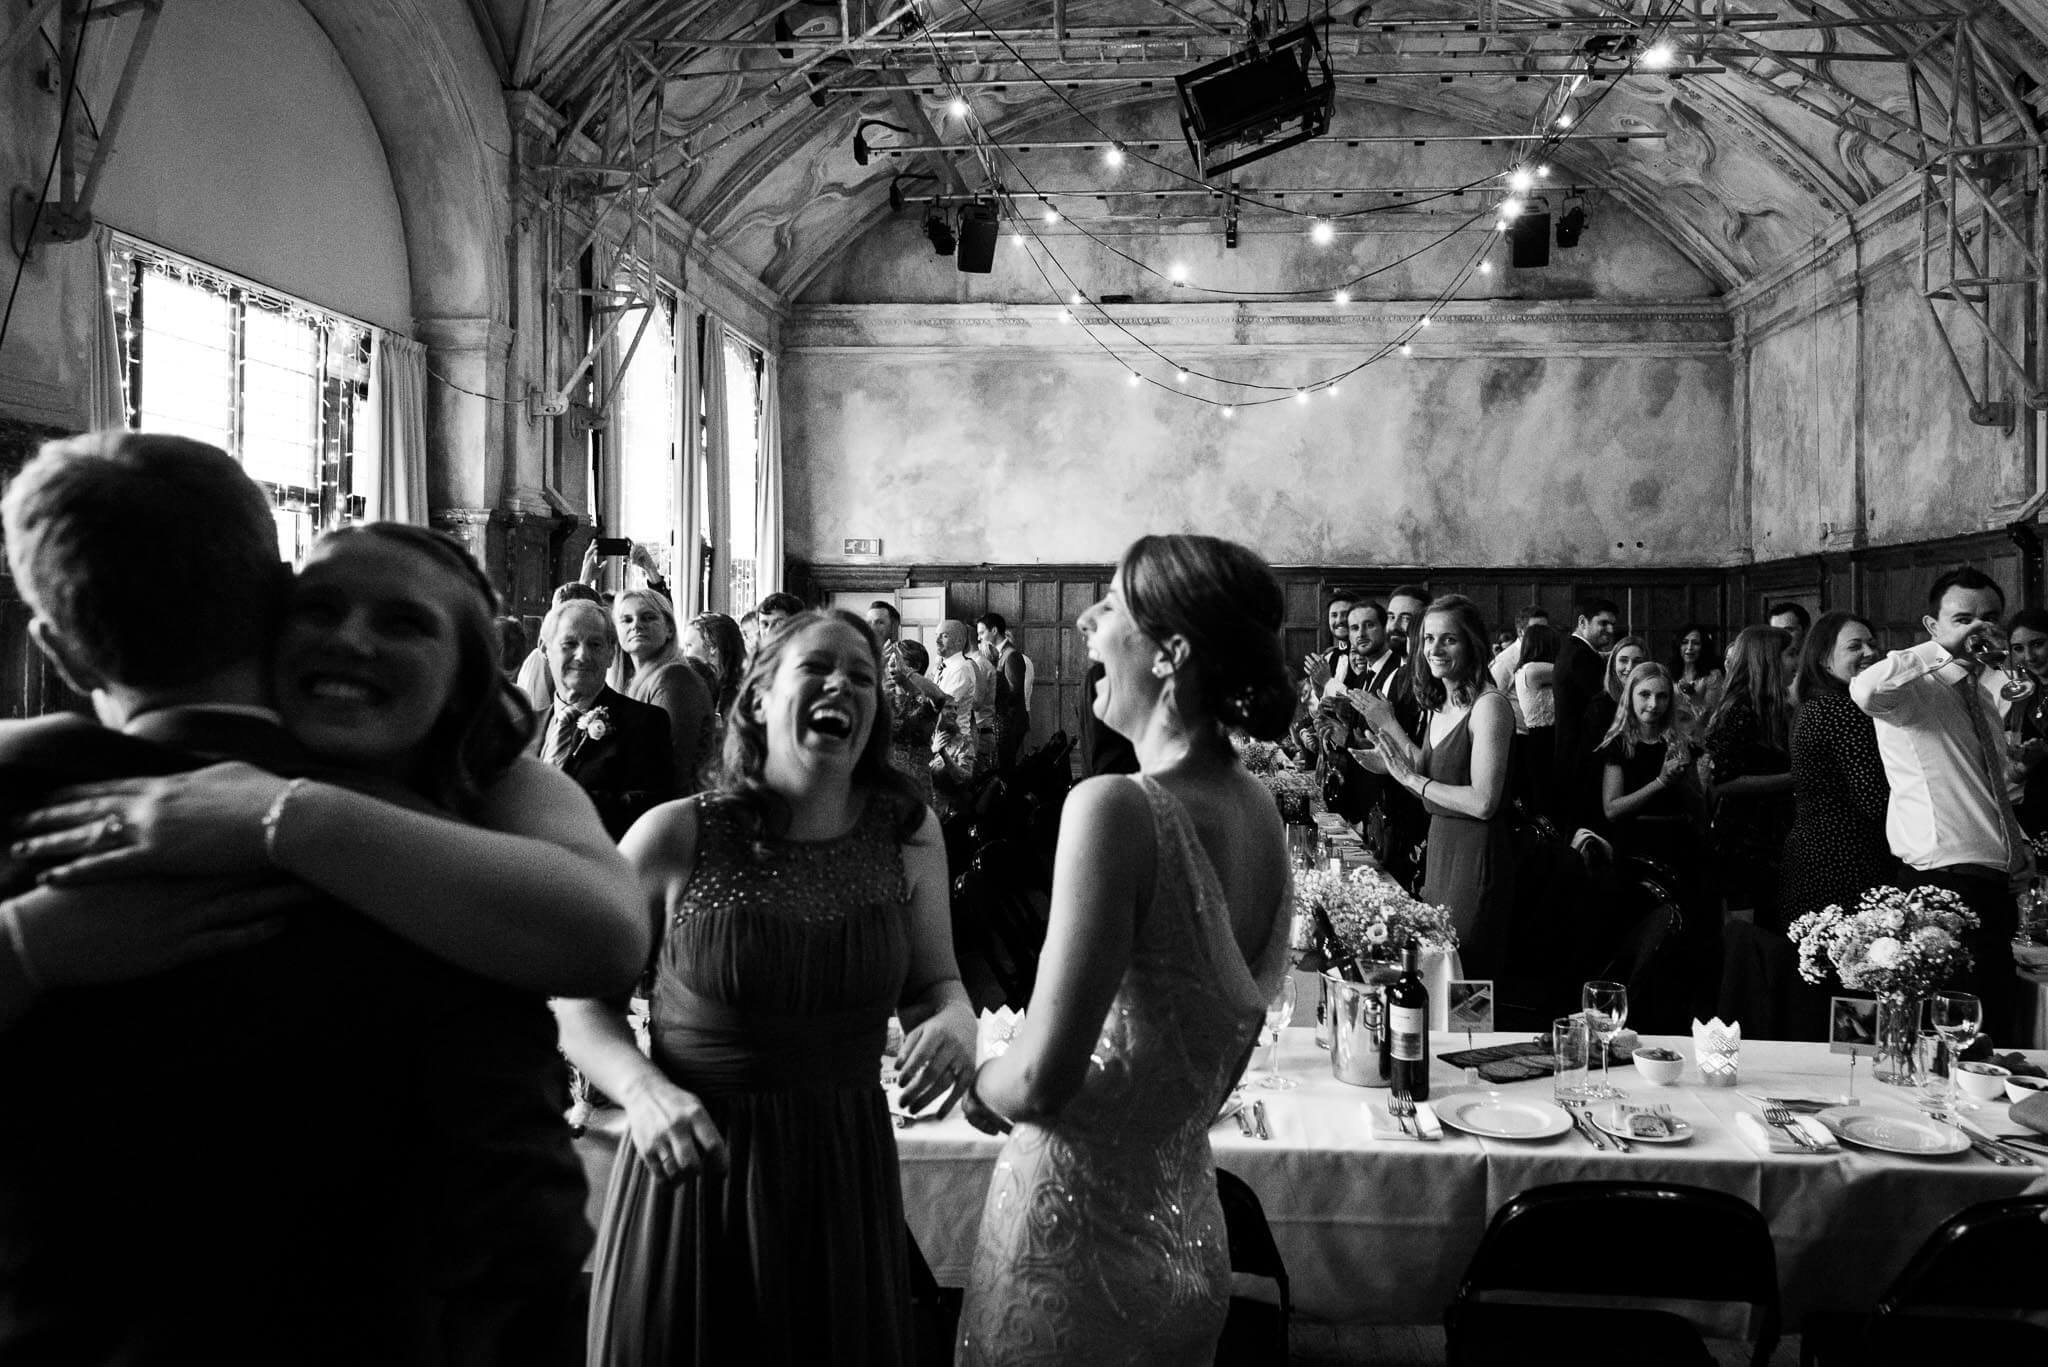 happy moments in battersea arts centre, black & white photography